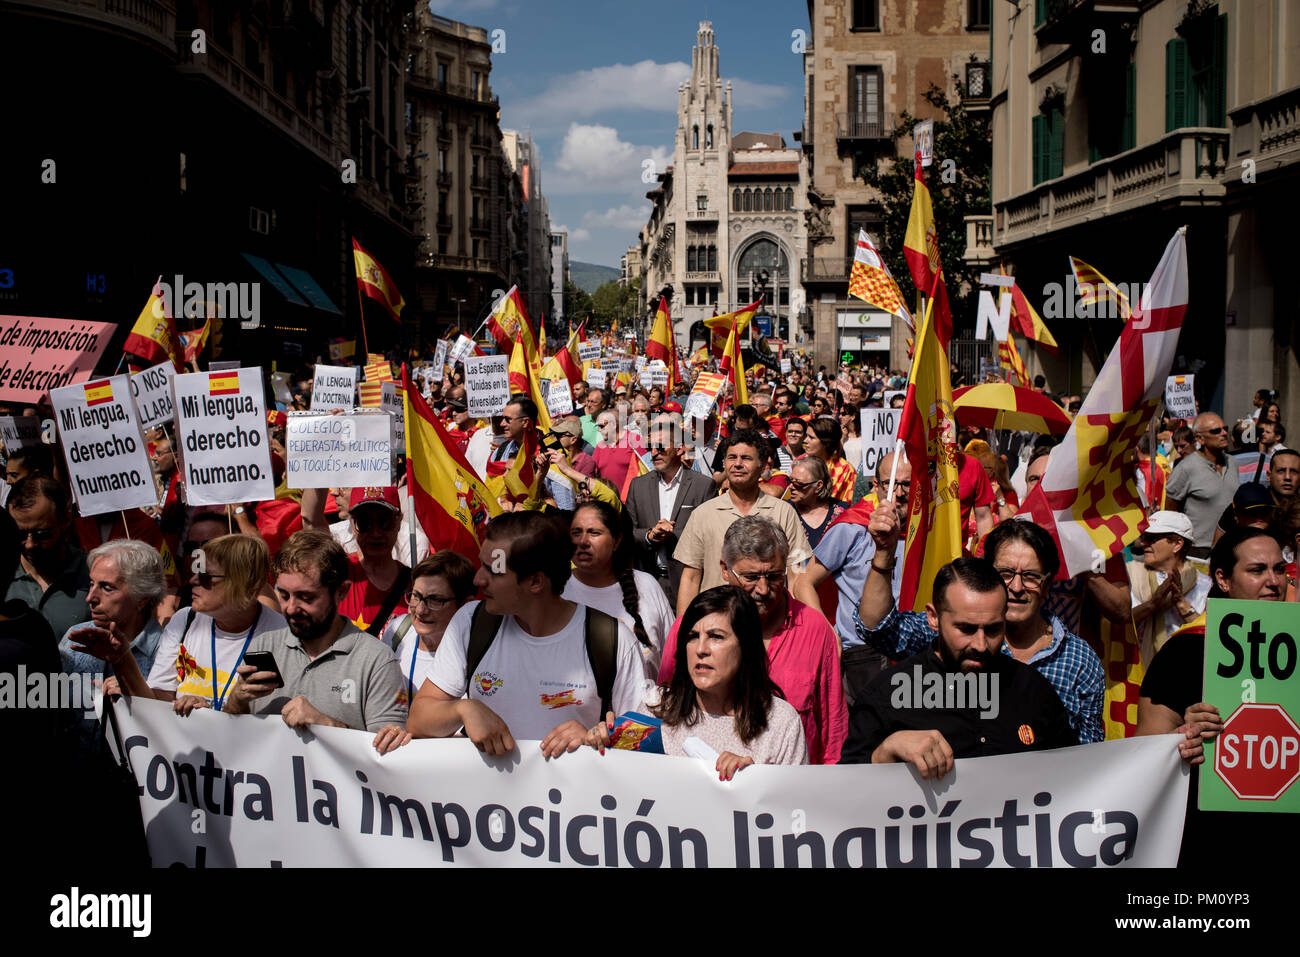 Barcelona, Spain. 16 September 2018.  Protesters called by unionist organizations march  in Barcelona in support of the use of the Spanish language and against the Language immersion system, a technique using bilingual language education (Catalan and Spanish) in the Catalan schools. Credit:  Jordi Boixareu/Alamy Live News Stock Photo